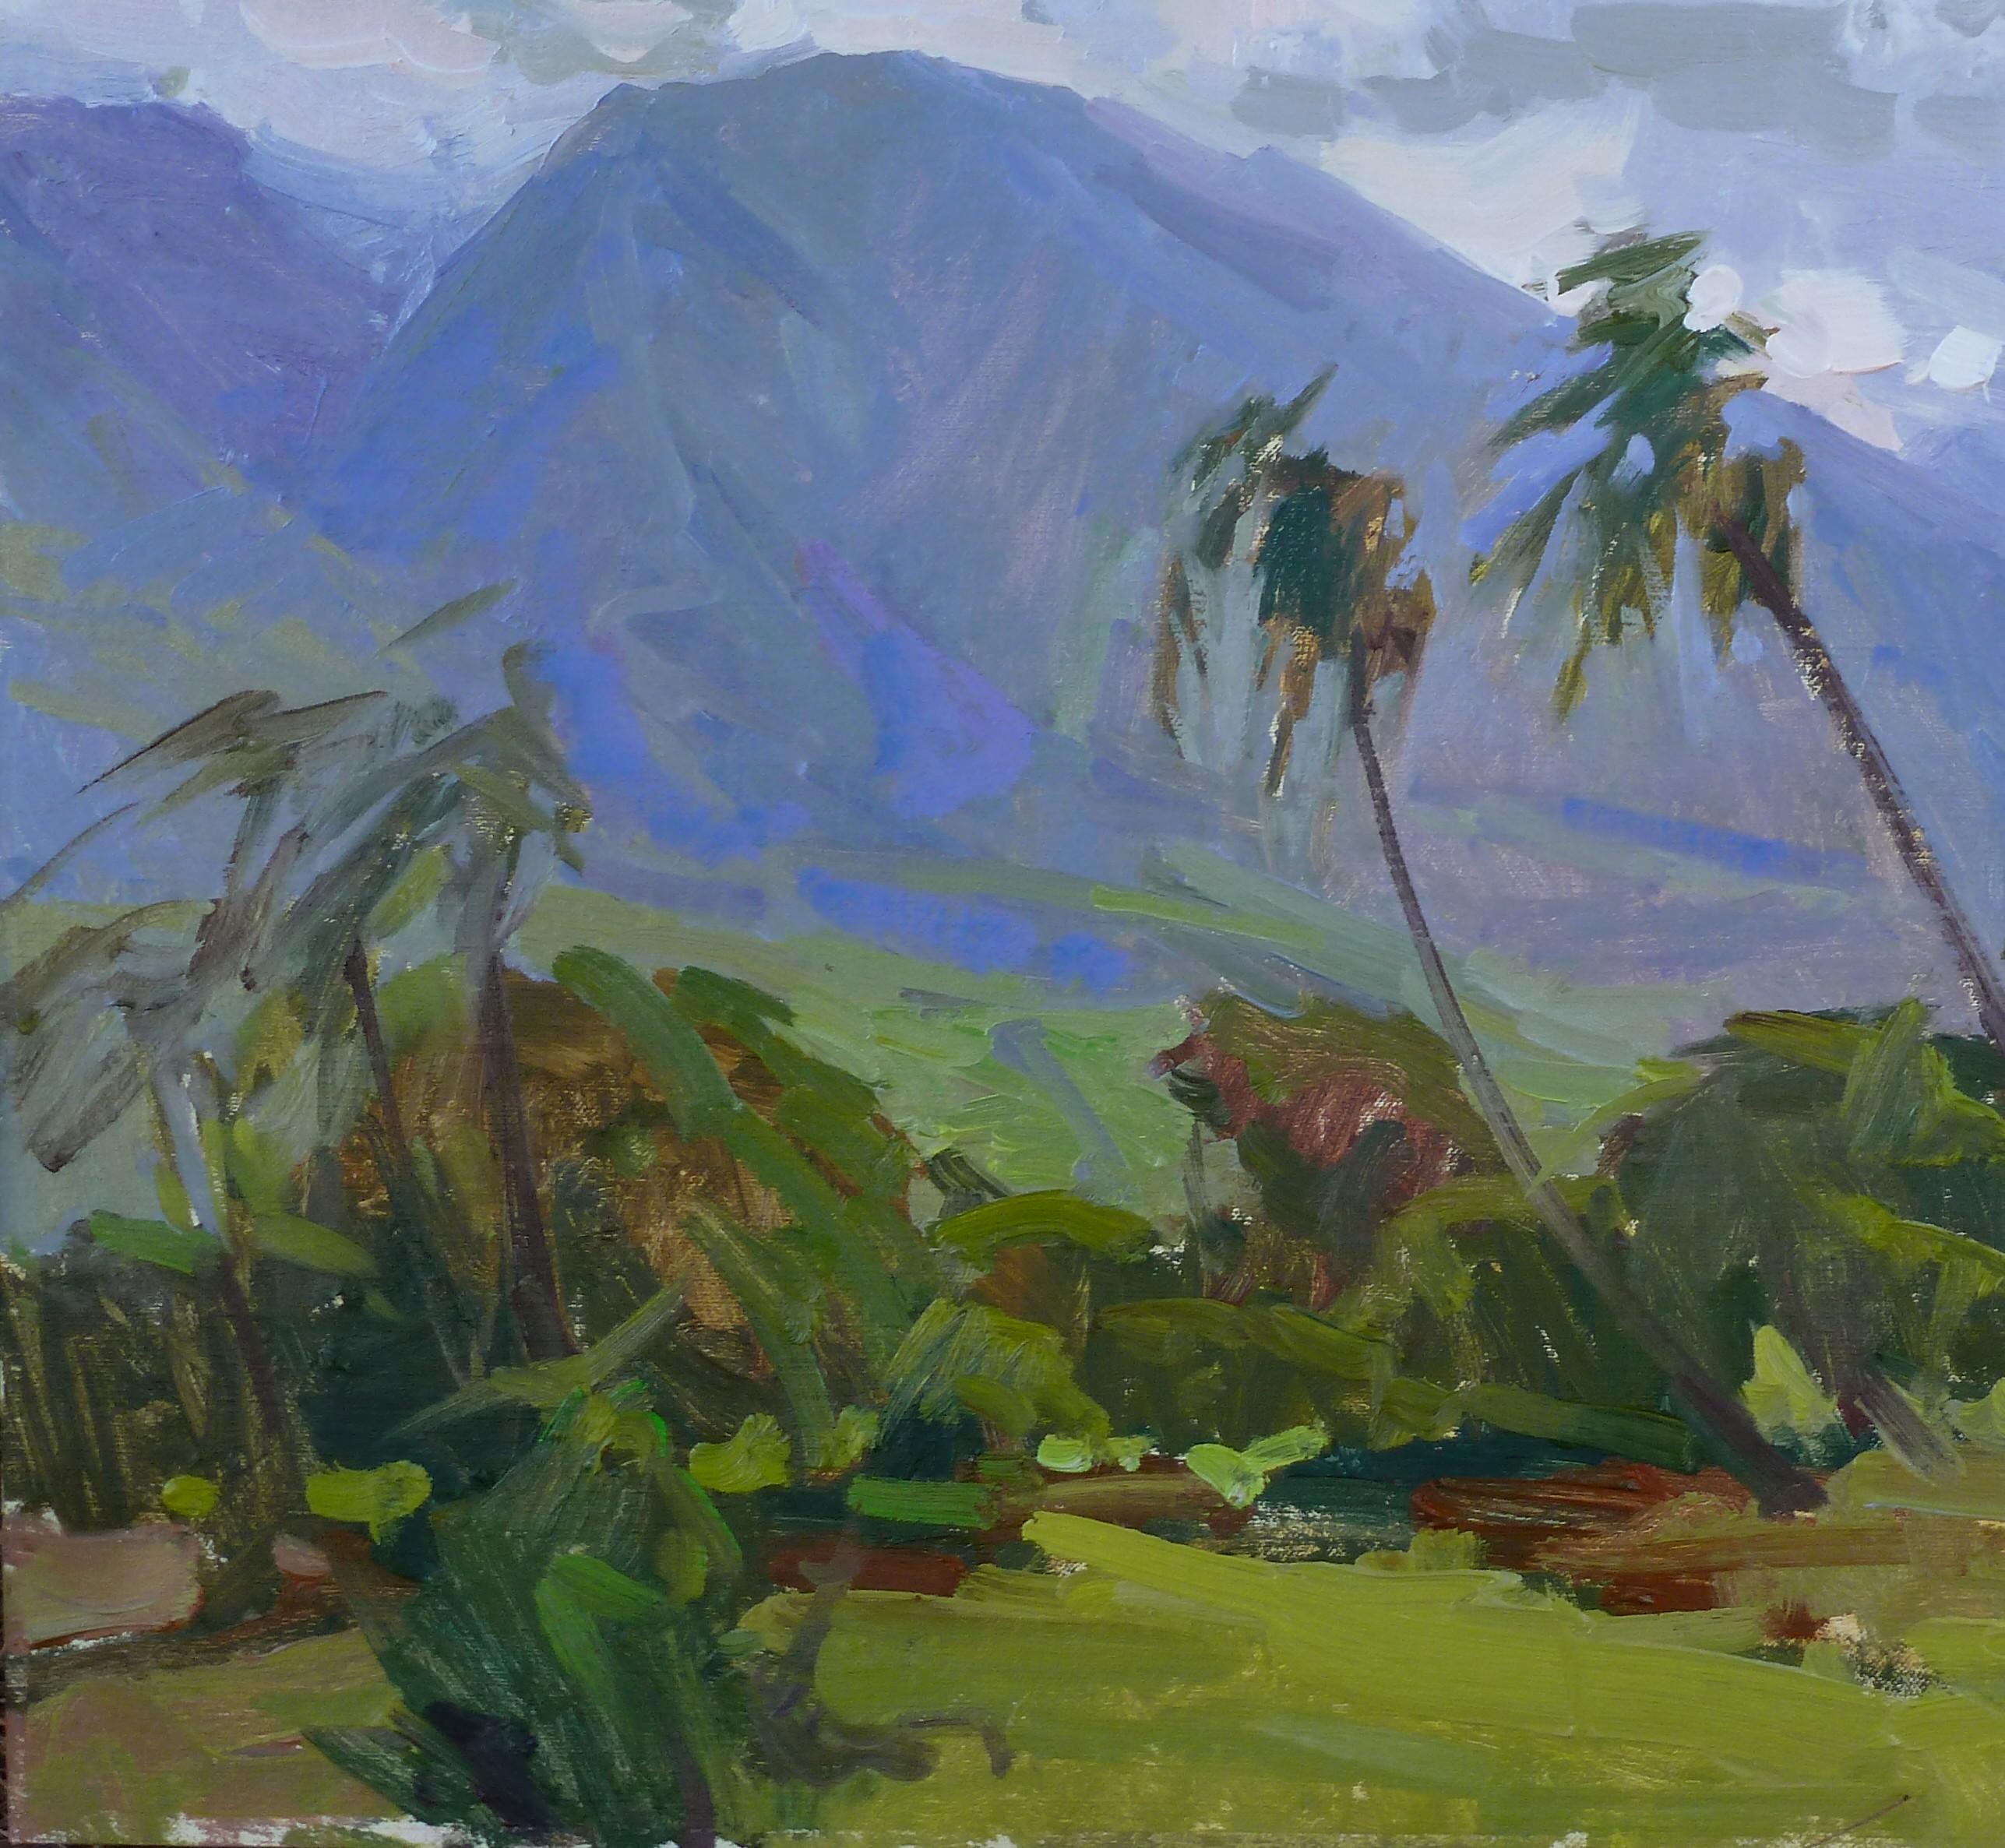 Twins, American Impressionism, Hawaii, Oil Painters of America, Landscape - Painting by Lori Putnam